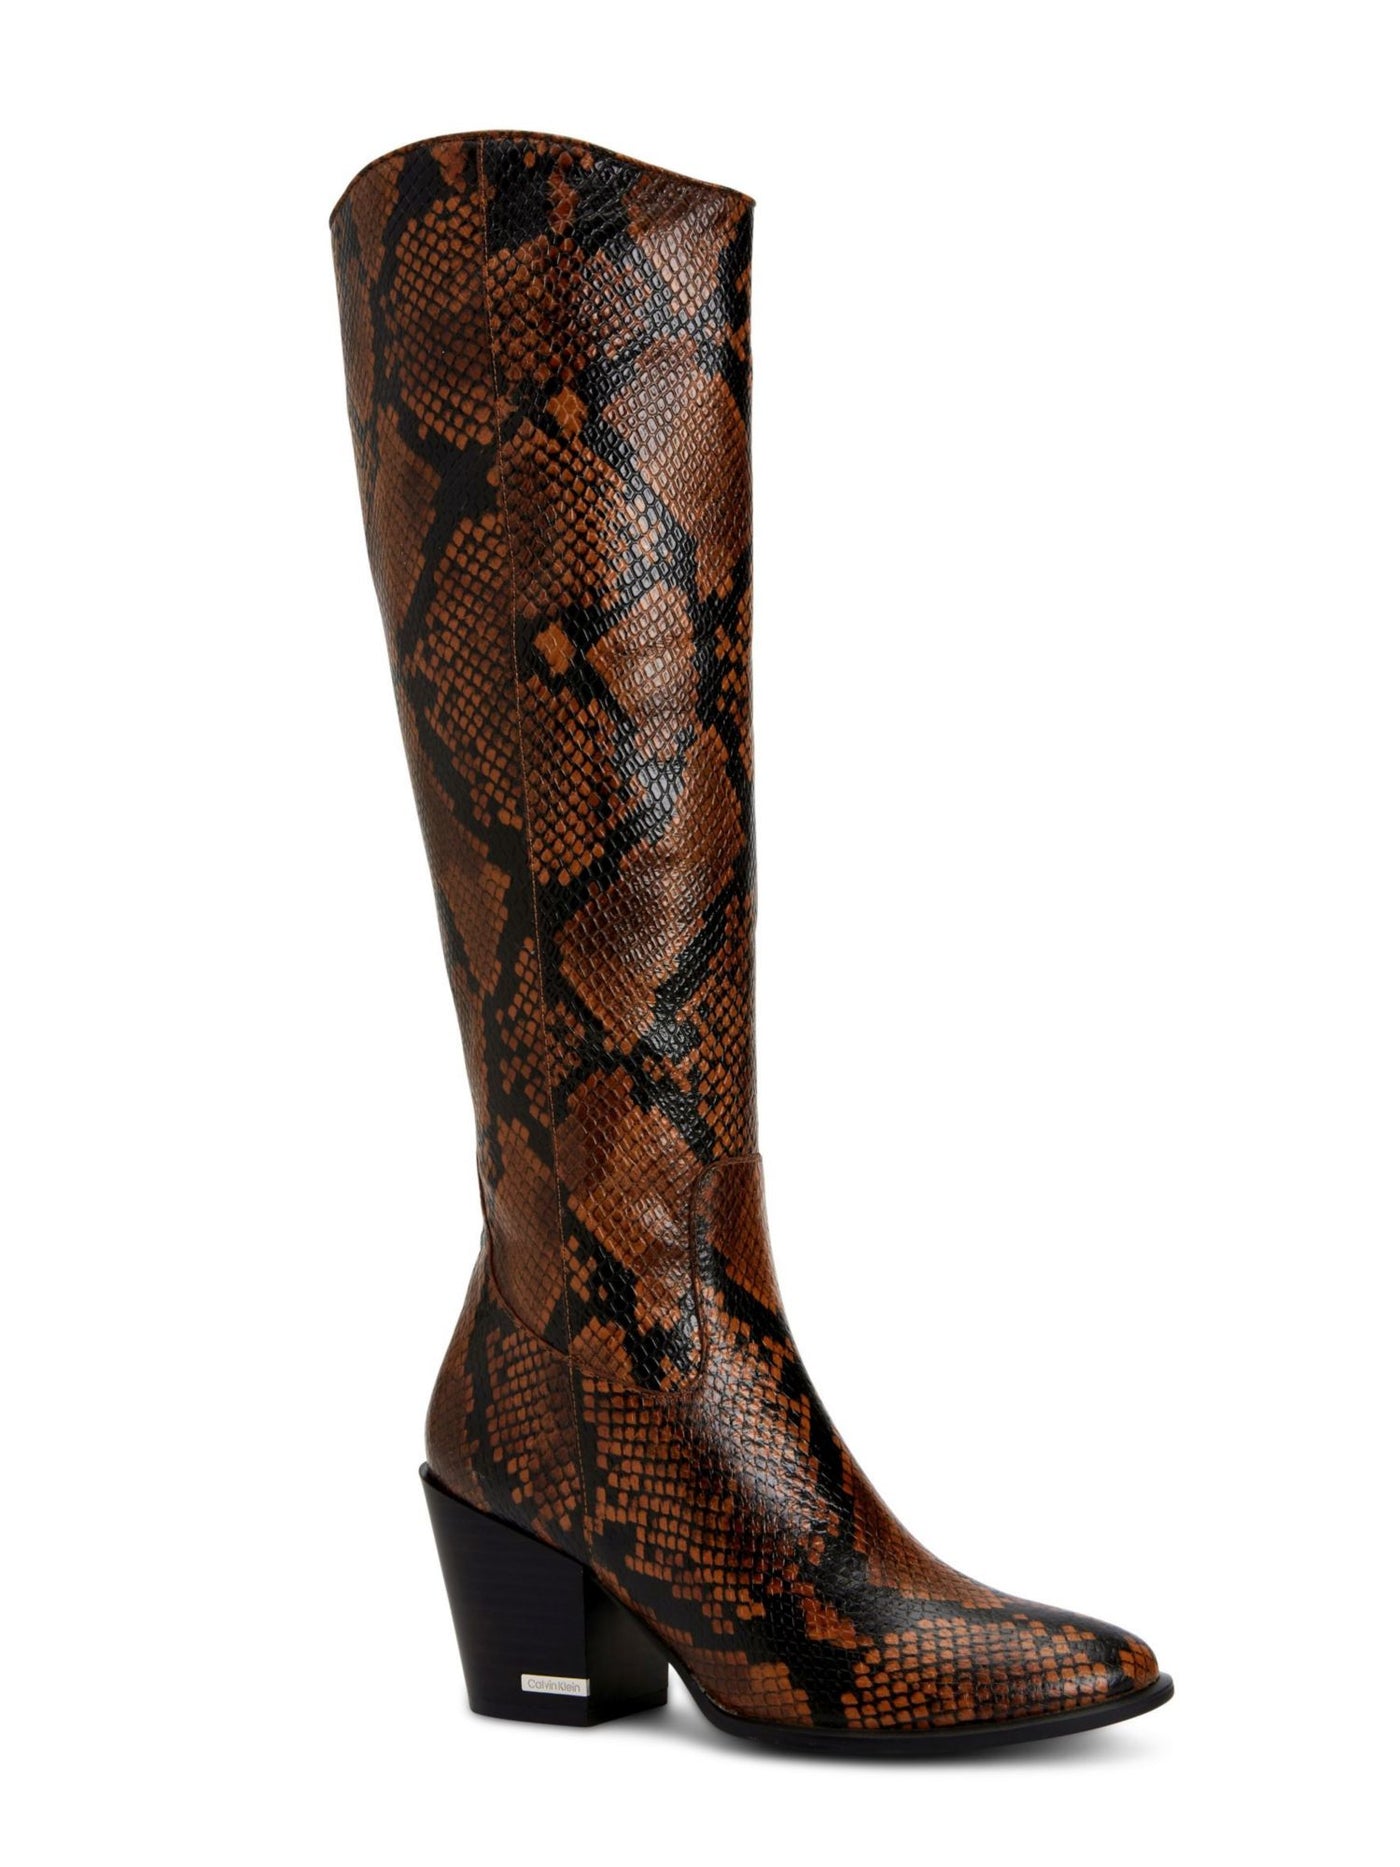 CALVIN KLEIN Womens Brown Animal Print Almond Toe Stacked Heel Zip-Up Leather Heeled Boots 6